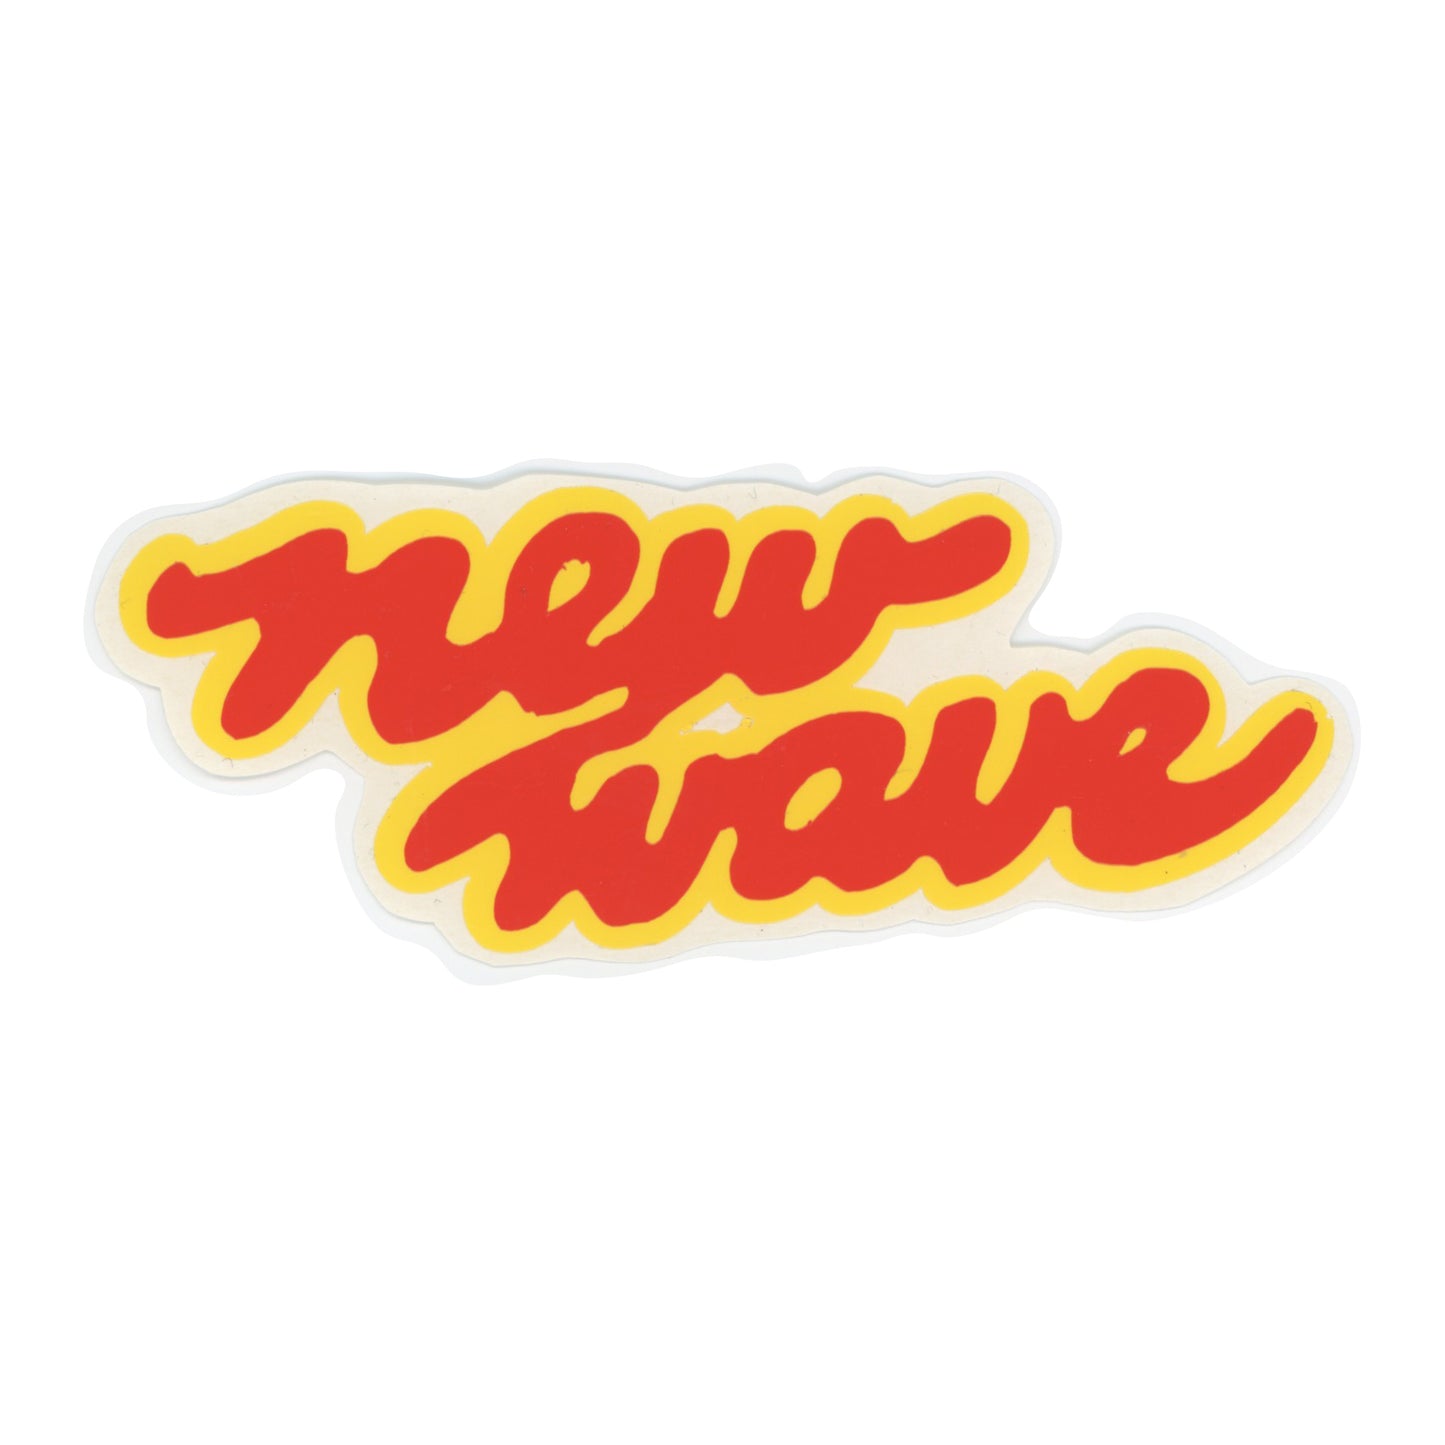 NEW WAVE YELLOW RED Sticker